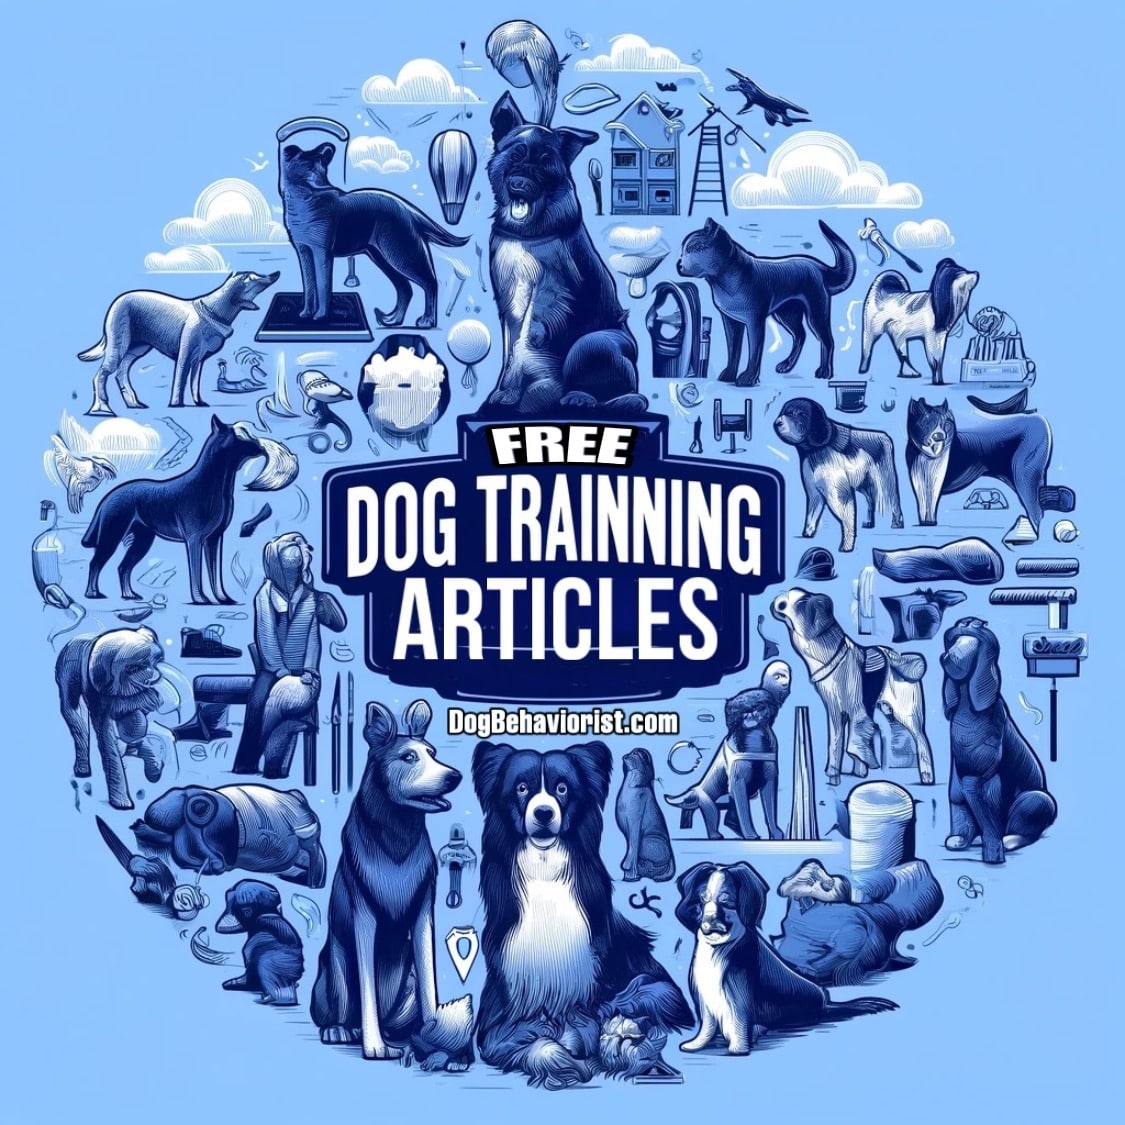 Featured image of Free Dog Training Articles' showcasing a montage of various dog breeds engaging in different training activities against a blue background.